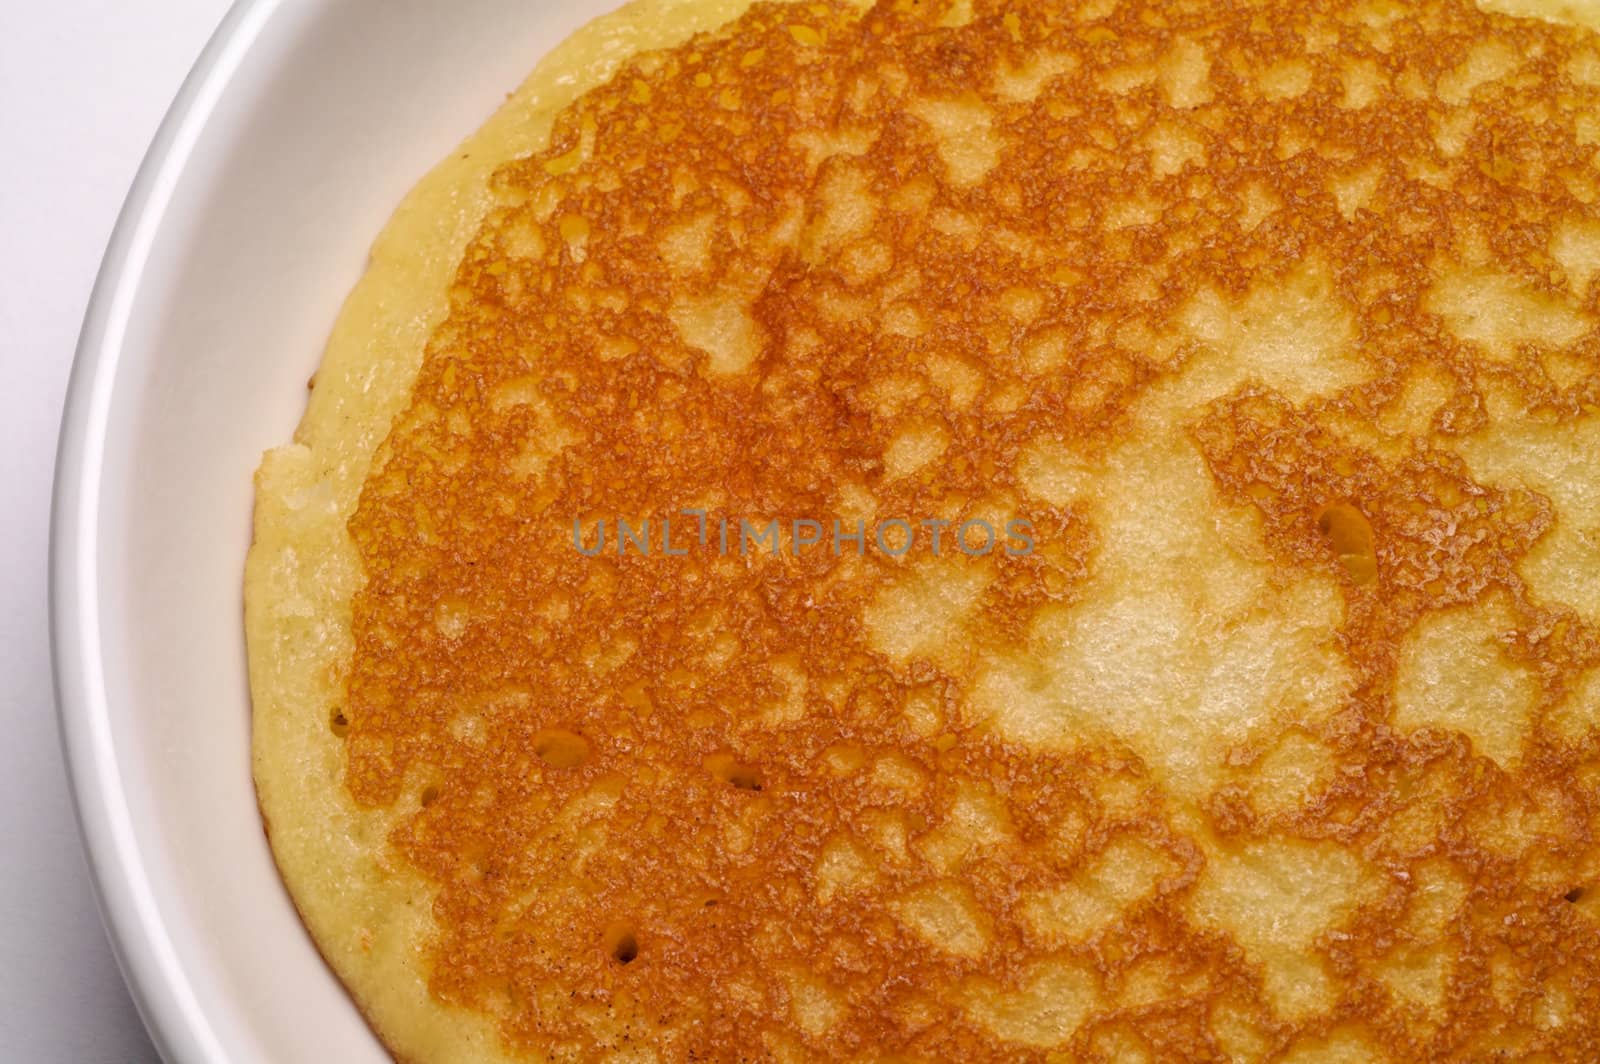 Pancake in a dish by Laborer